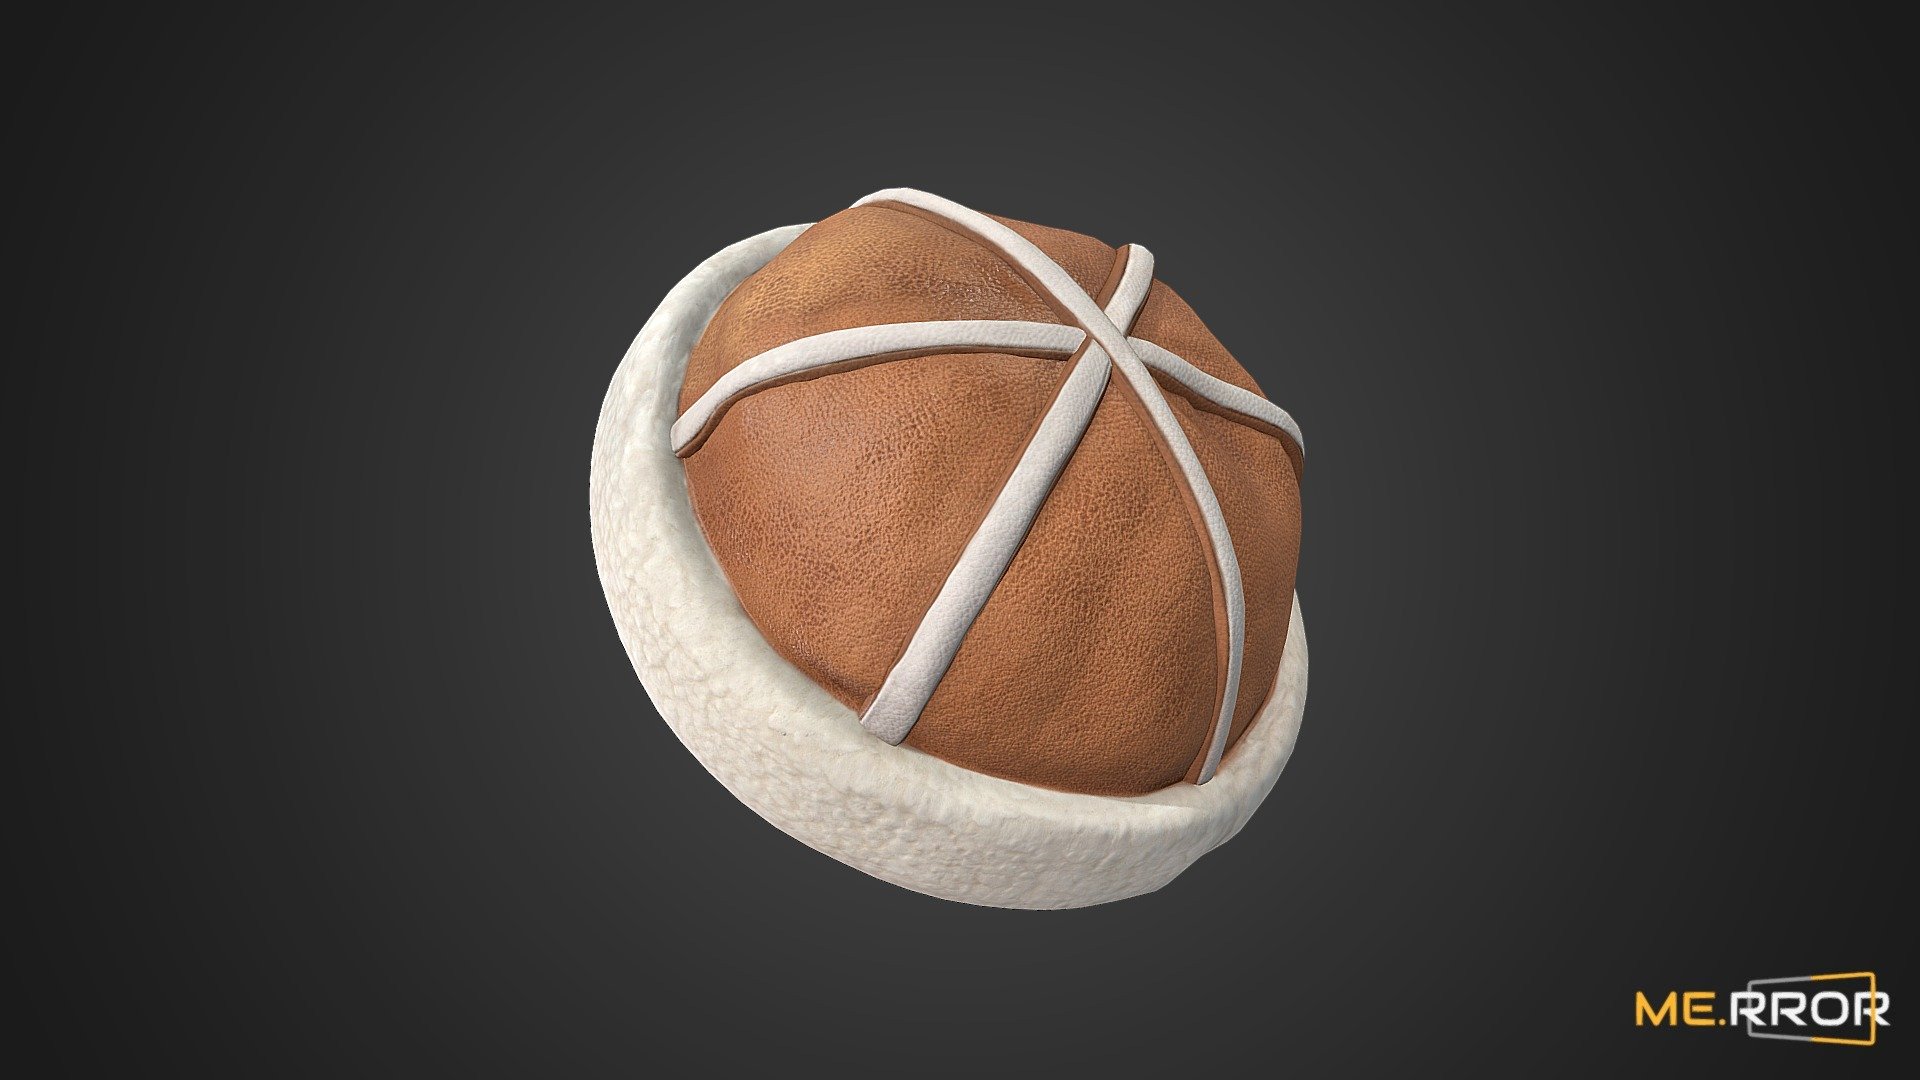 MERROR is a 3D Content PLATFORM which introduces various Asian assets to the 3D world


3DScanning #Photogrametry #ME.RROR - [Game-Ready] Leather Fleece Hat - Buy Royalty Free 3D model by ME.RROR (@merror) 3d model